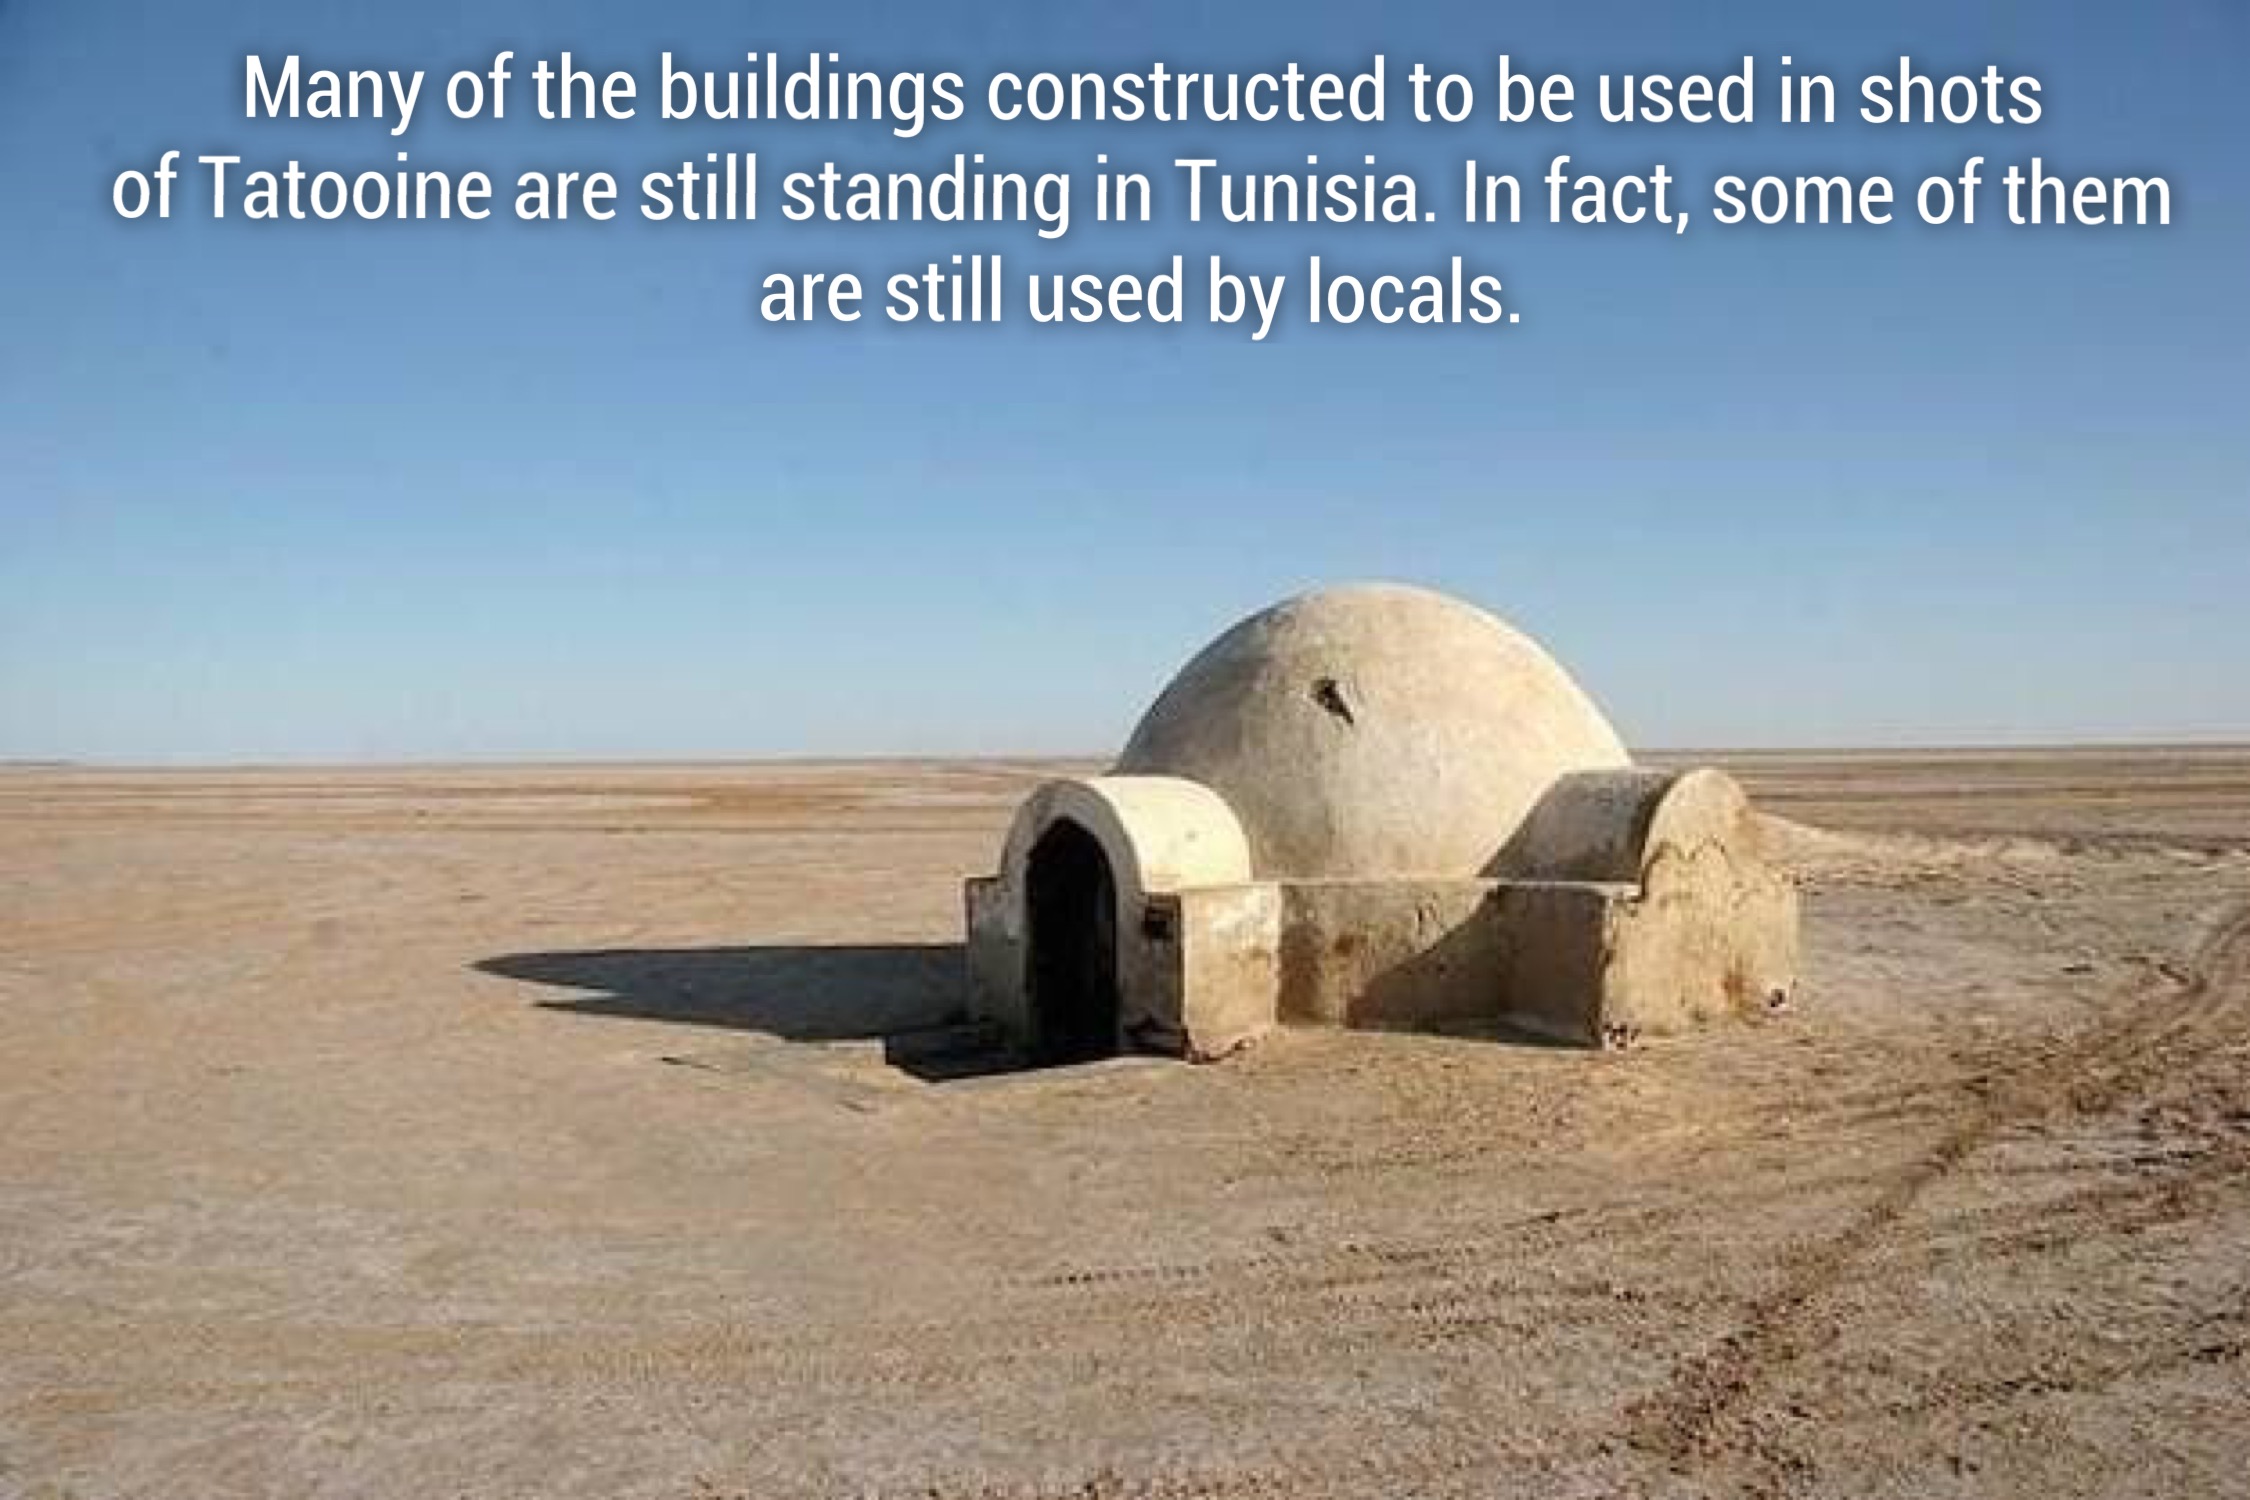 star wars planeta tatooine - Many of the buildings constructed to be used in shots of Tatooine are still standing in Tunisia. In fact, some of them are still used by locals. of Taloy neare n ingin Tunisia. In fact, som